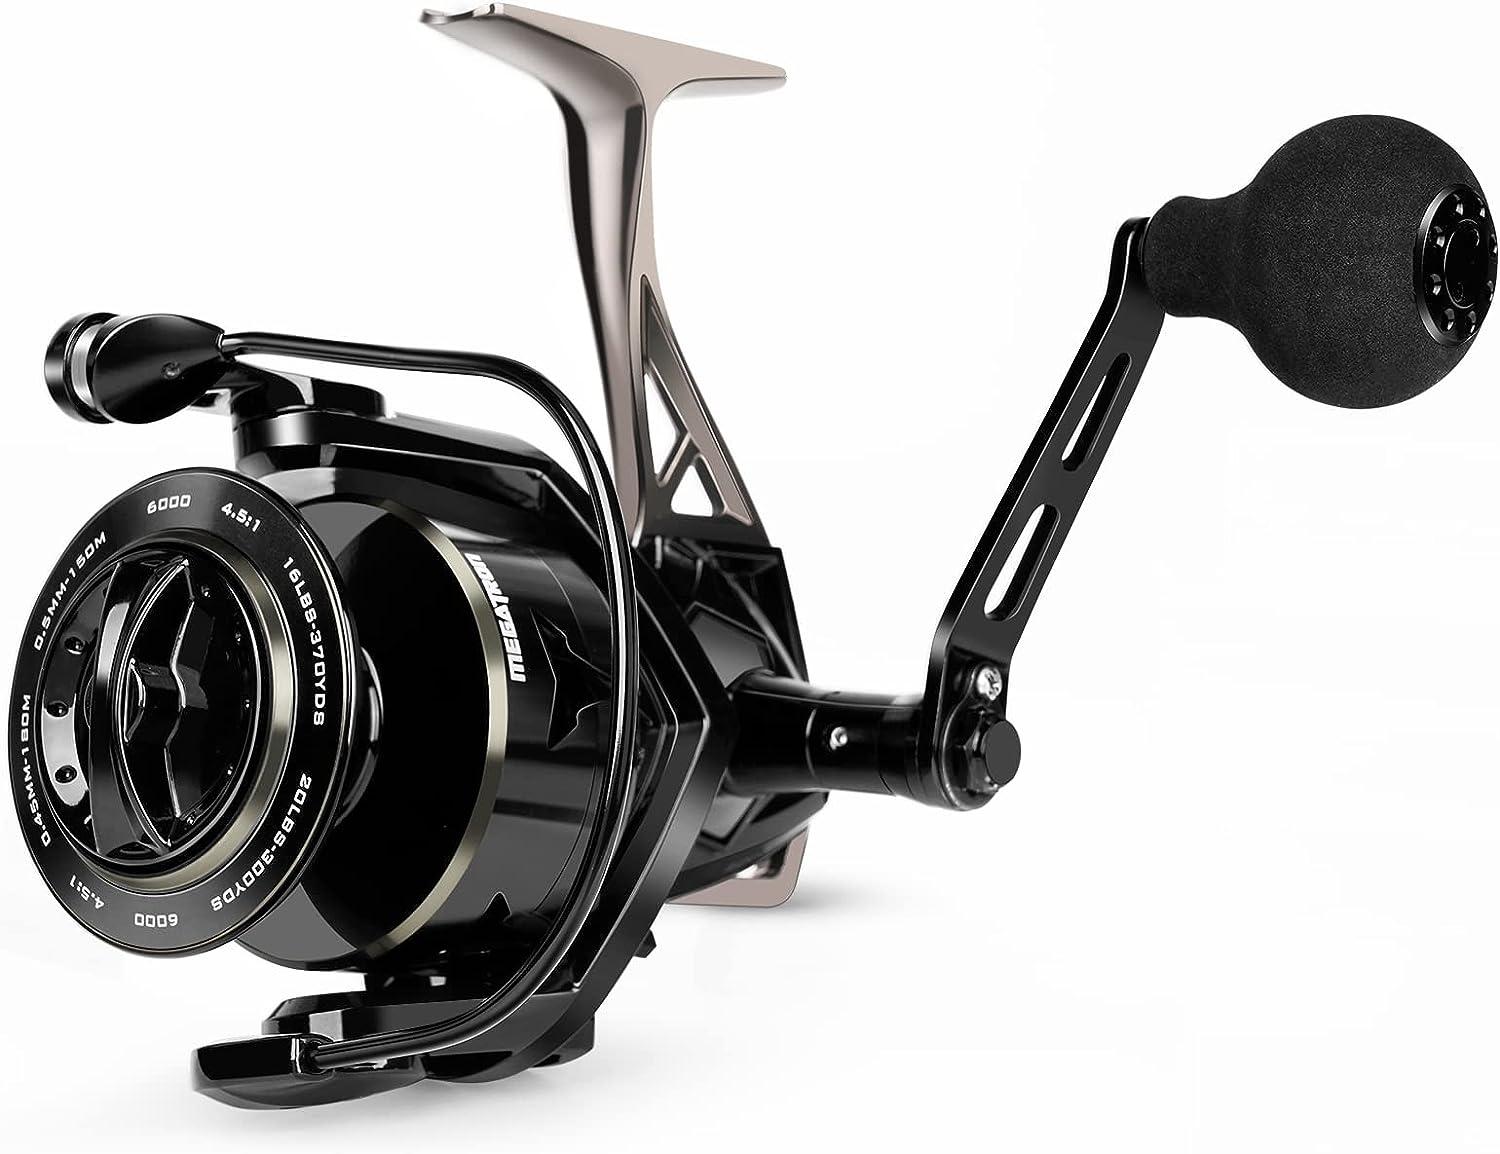 Buy KastKing Megatron Spinning Reel Freshwater and Saltwater Spinning  Fishing Reel Rigid Aluminum Frame 71 Double Shielded Stainless Steel BB  Over 30 lbs Carbon Drag CNC Aluminum Spool Handle at Ubuy Pakistan